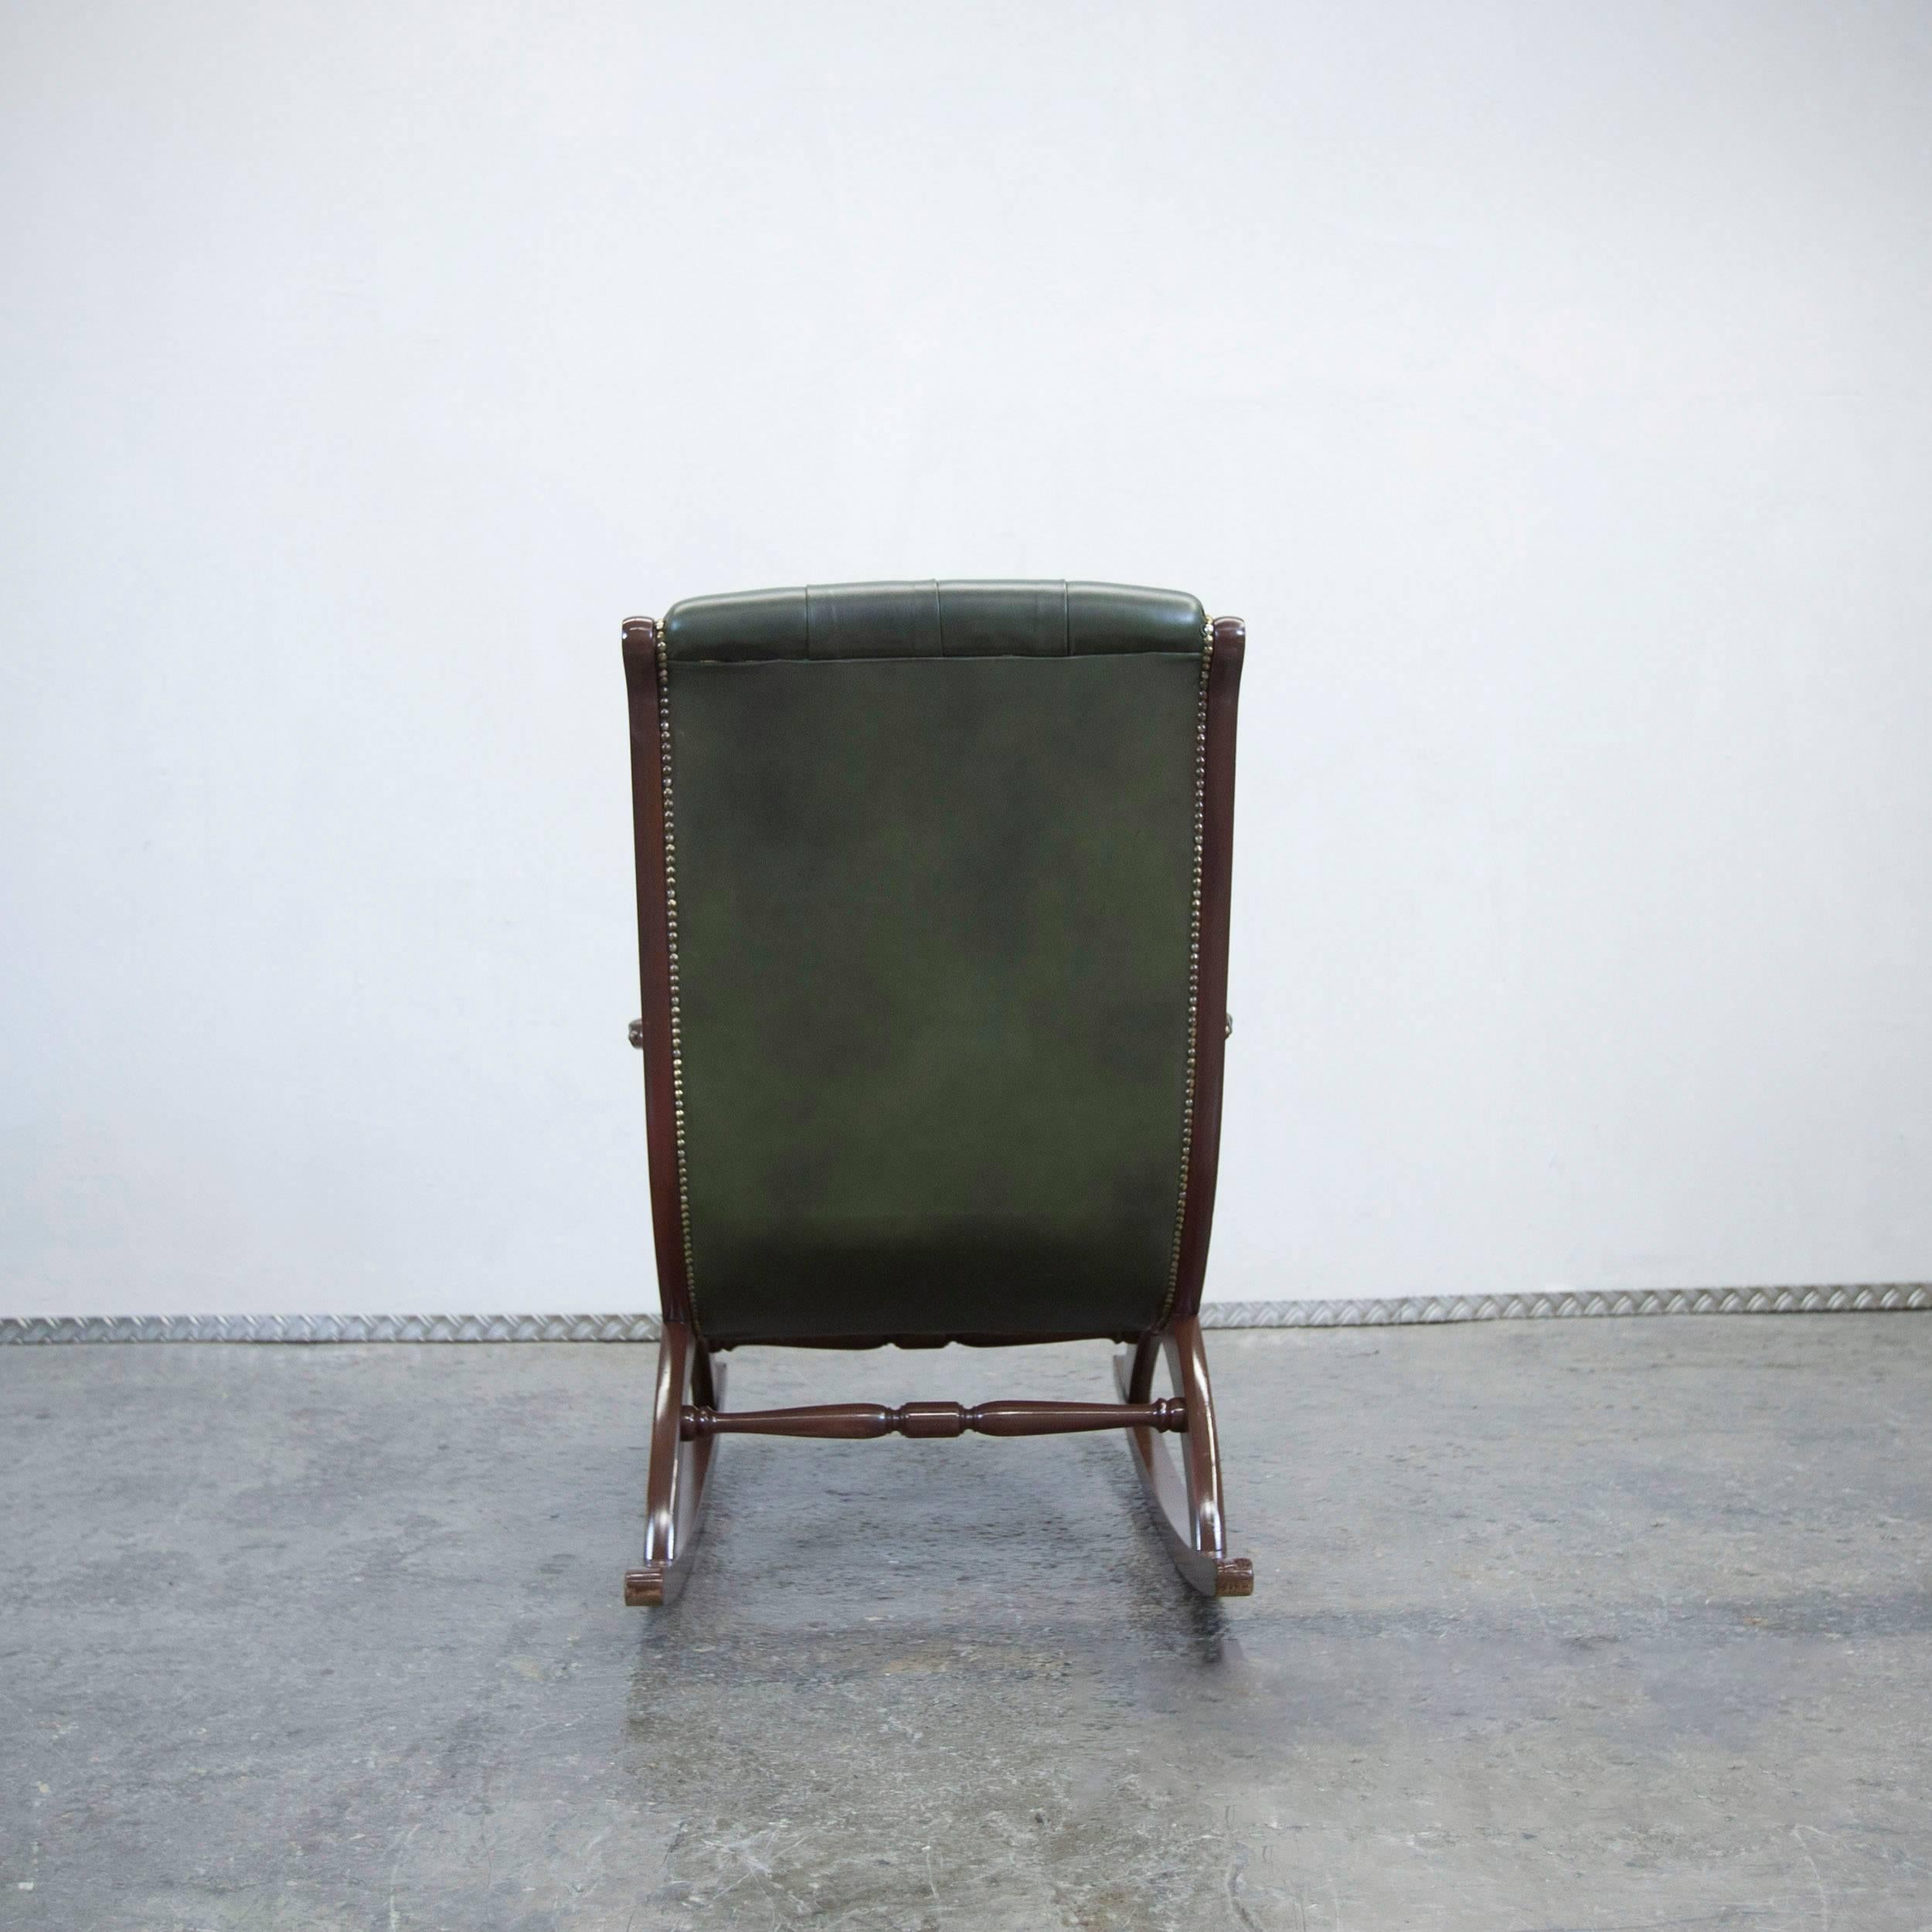 British Chesterfield Leather Rockingchair Green Oneseater Chair Vintage Retro Wood